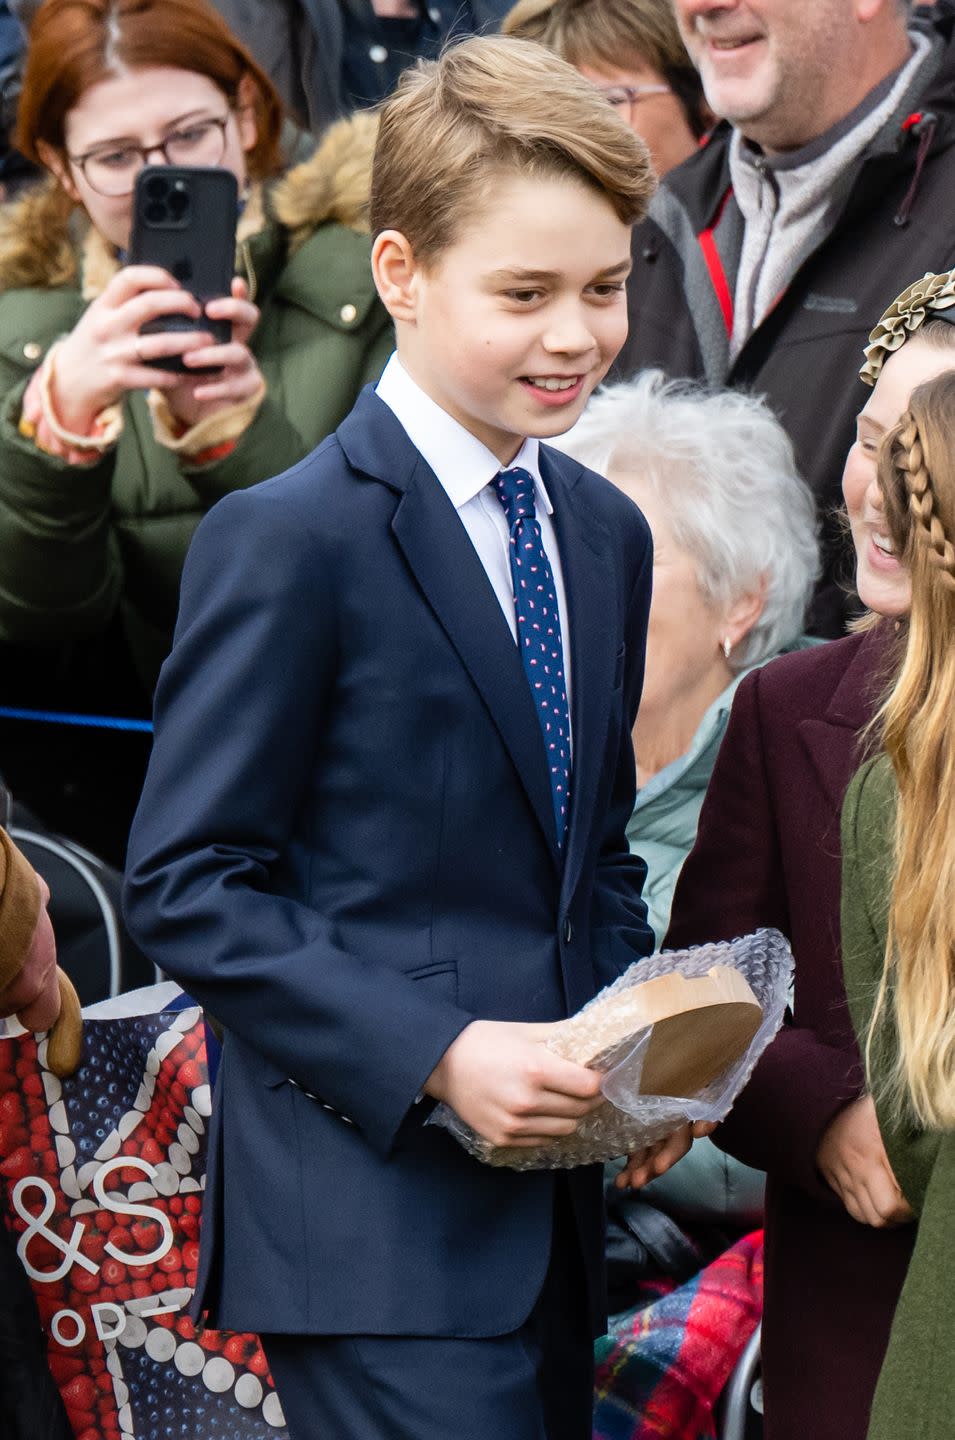 prince george of wales smiles as he stands next to people, he holds a wooden plaque in his hands and wears a blue suit with a white collared shirt and blue patterned tie